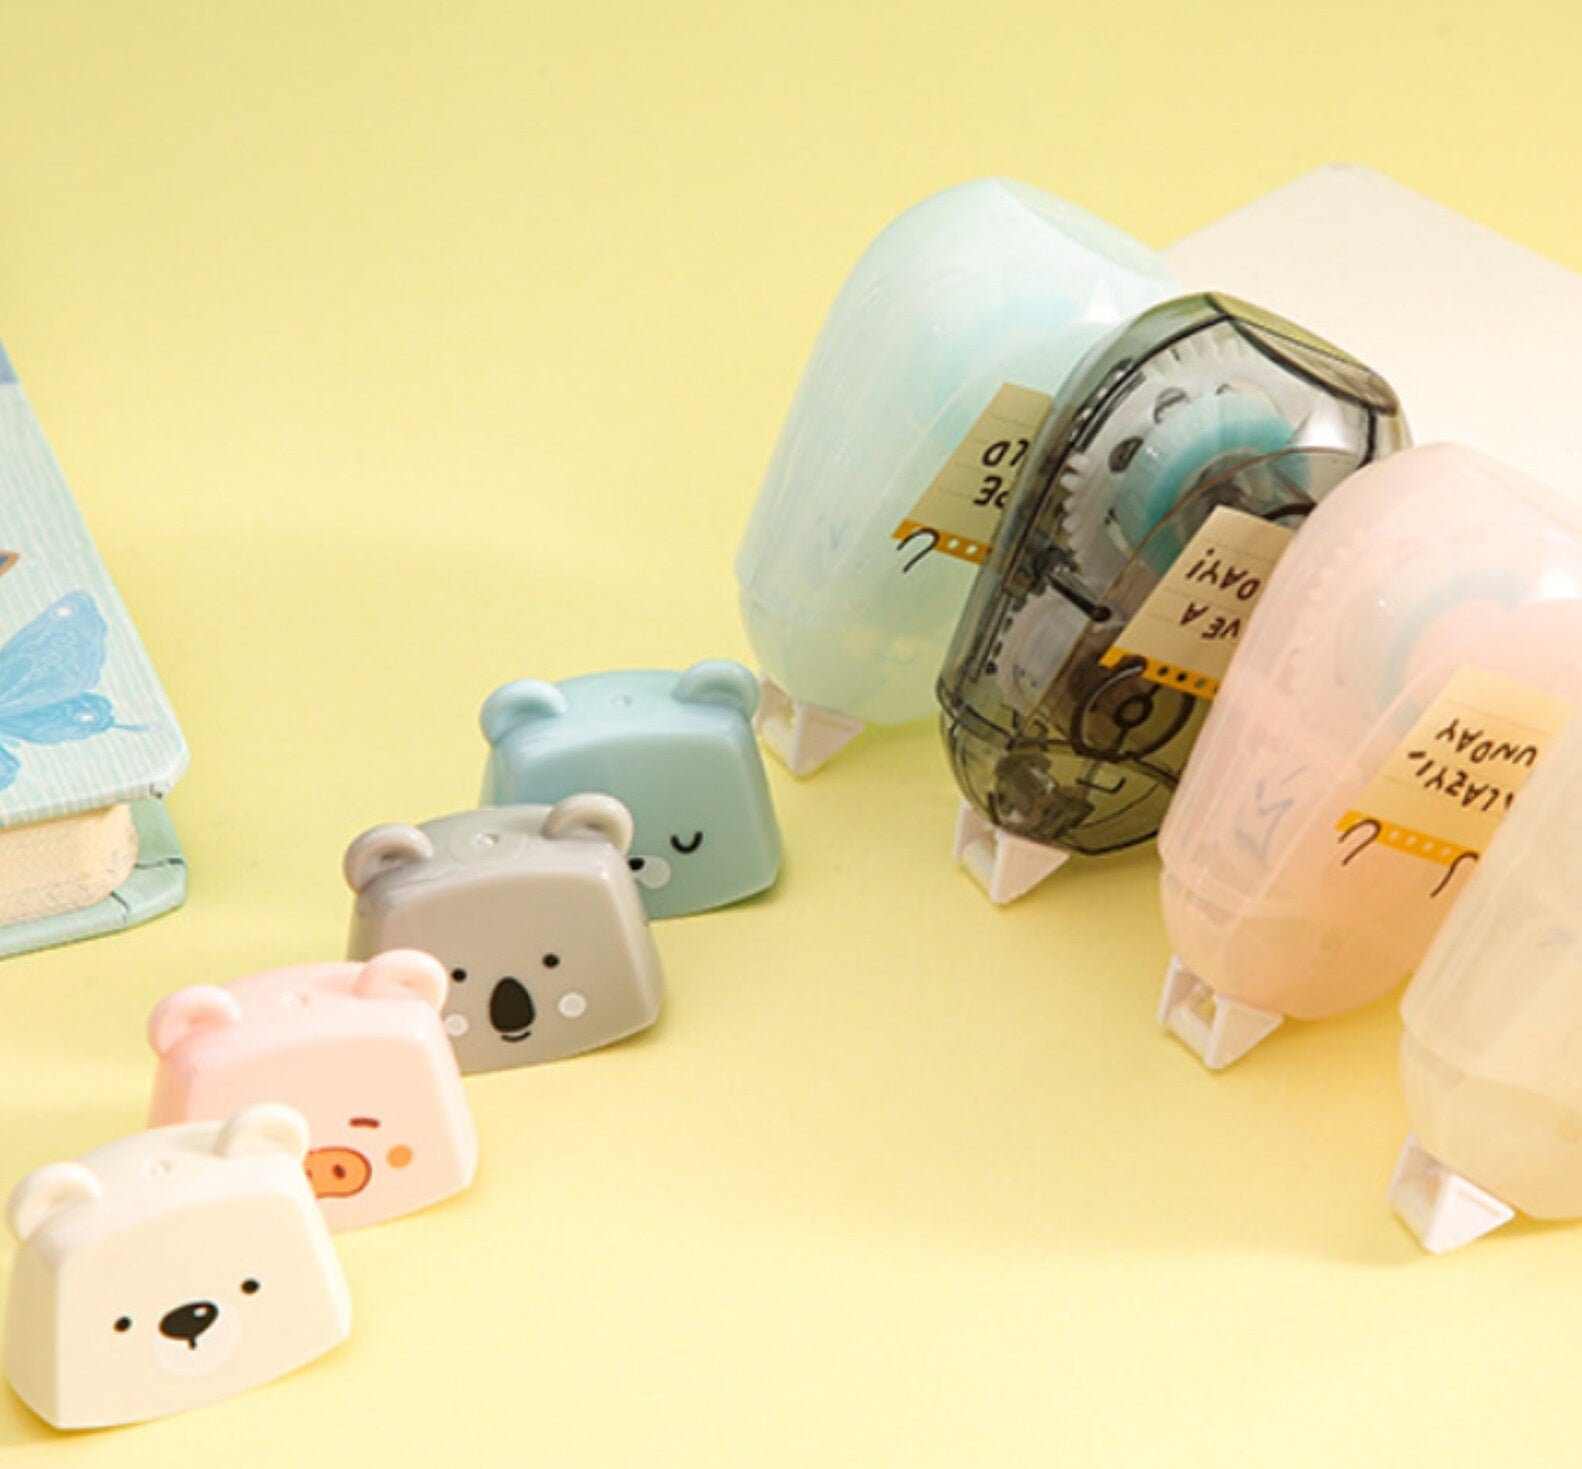 Adorable Animal double sided adhesive glue tape roller - Supple Room